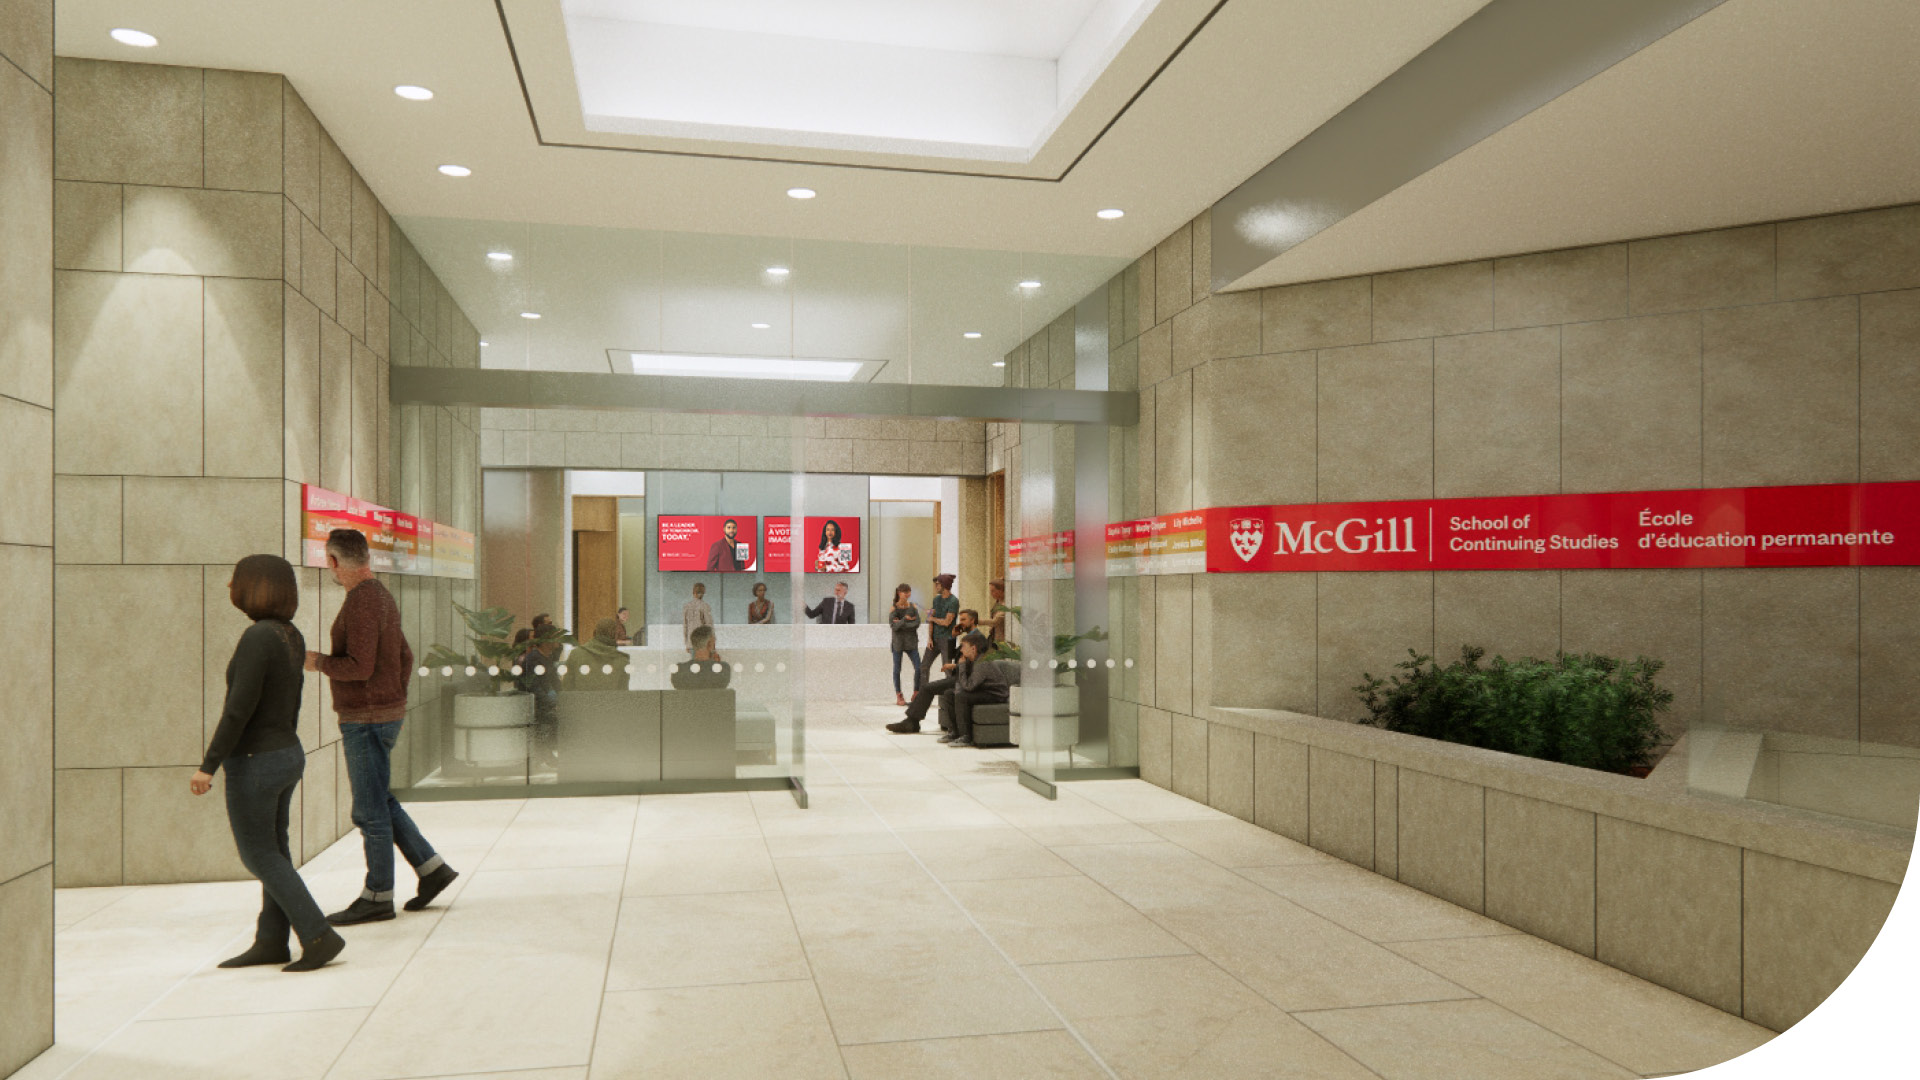 Rendering of the new Welcome Centre that shows the entrance of 680 Sherbrooke West with a client services desk